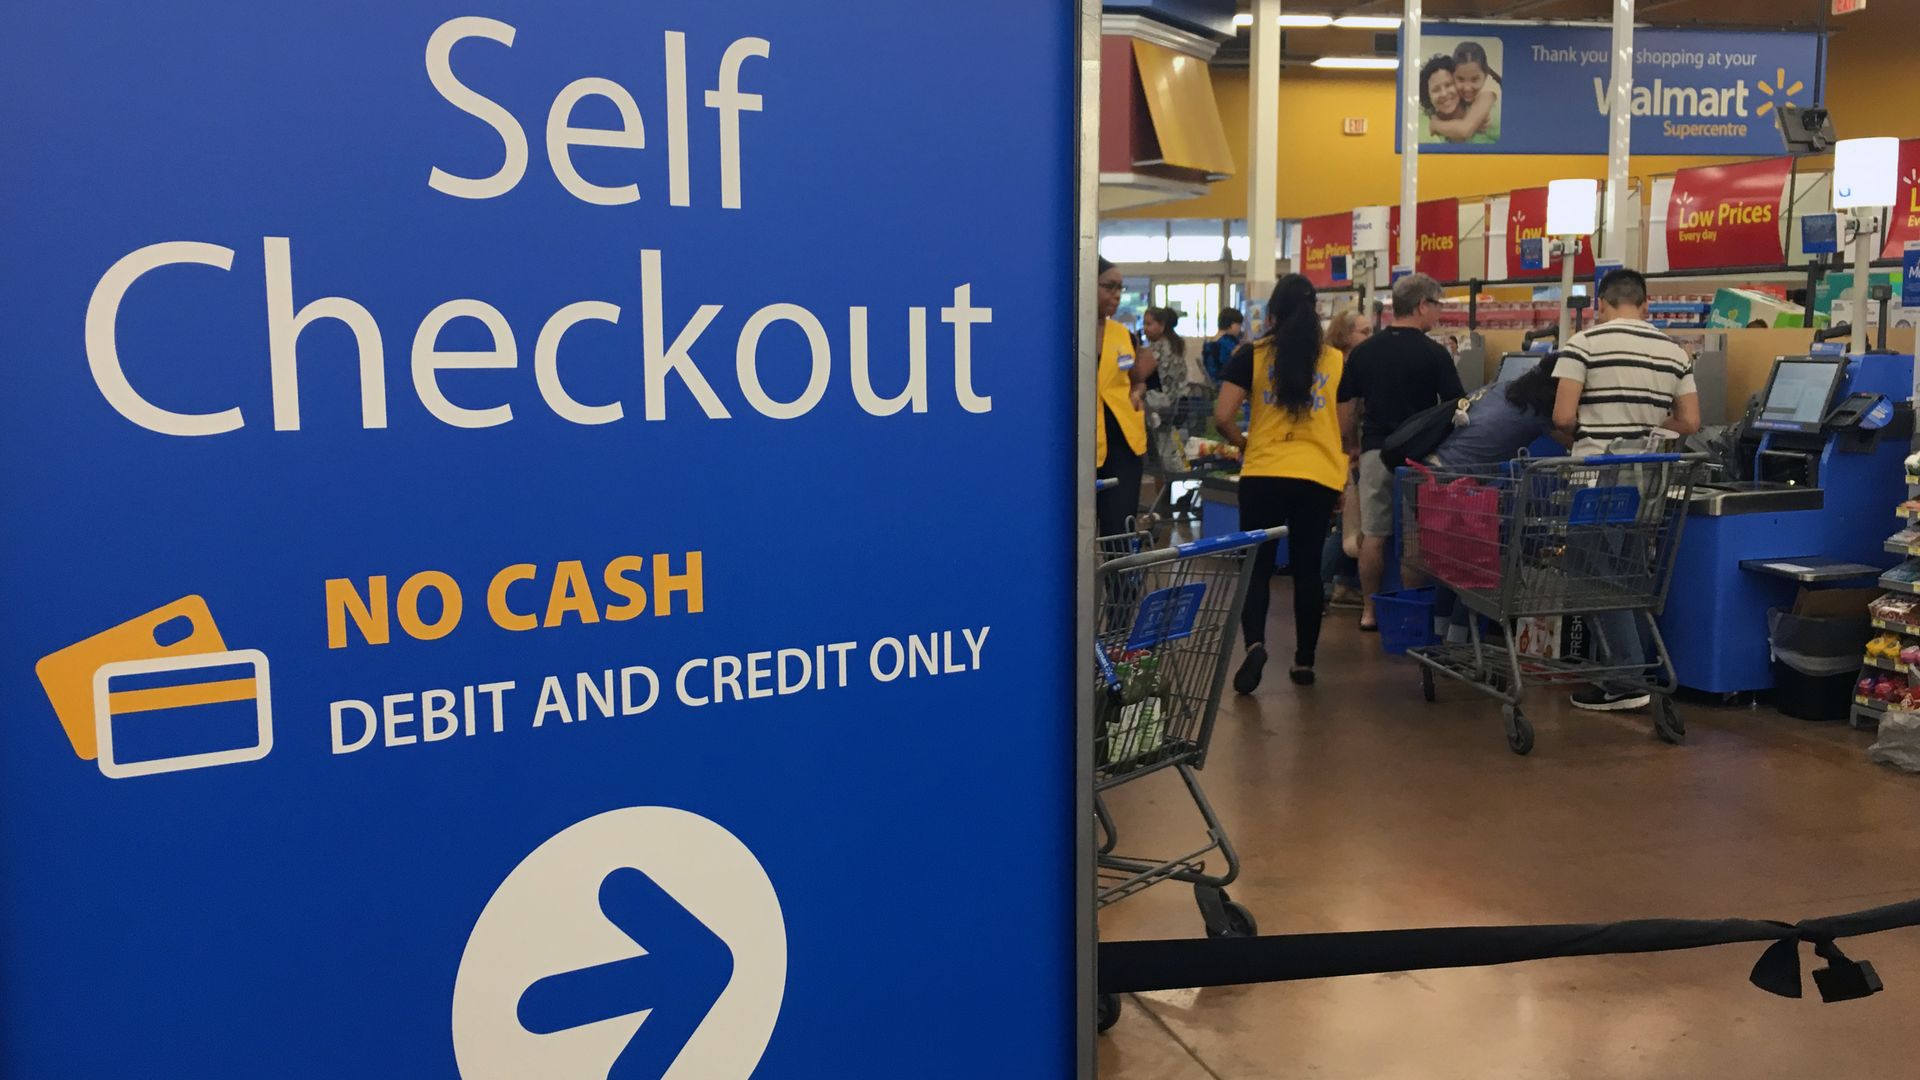 A Walmart sign pointing toward self checkout